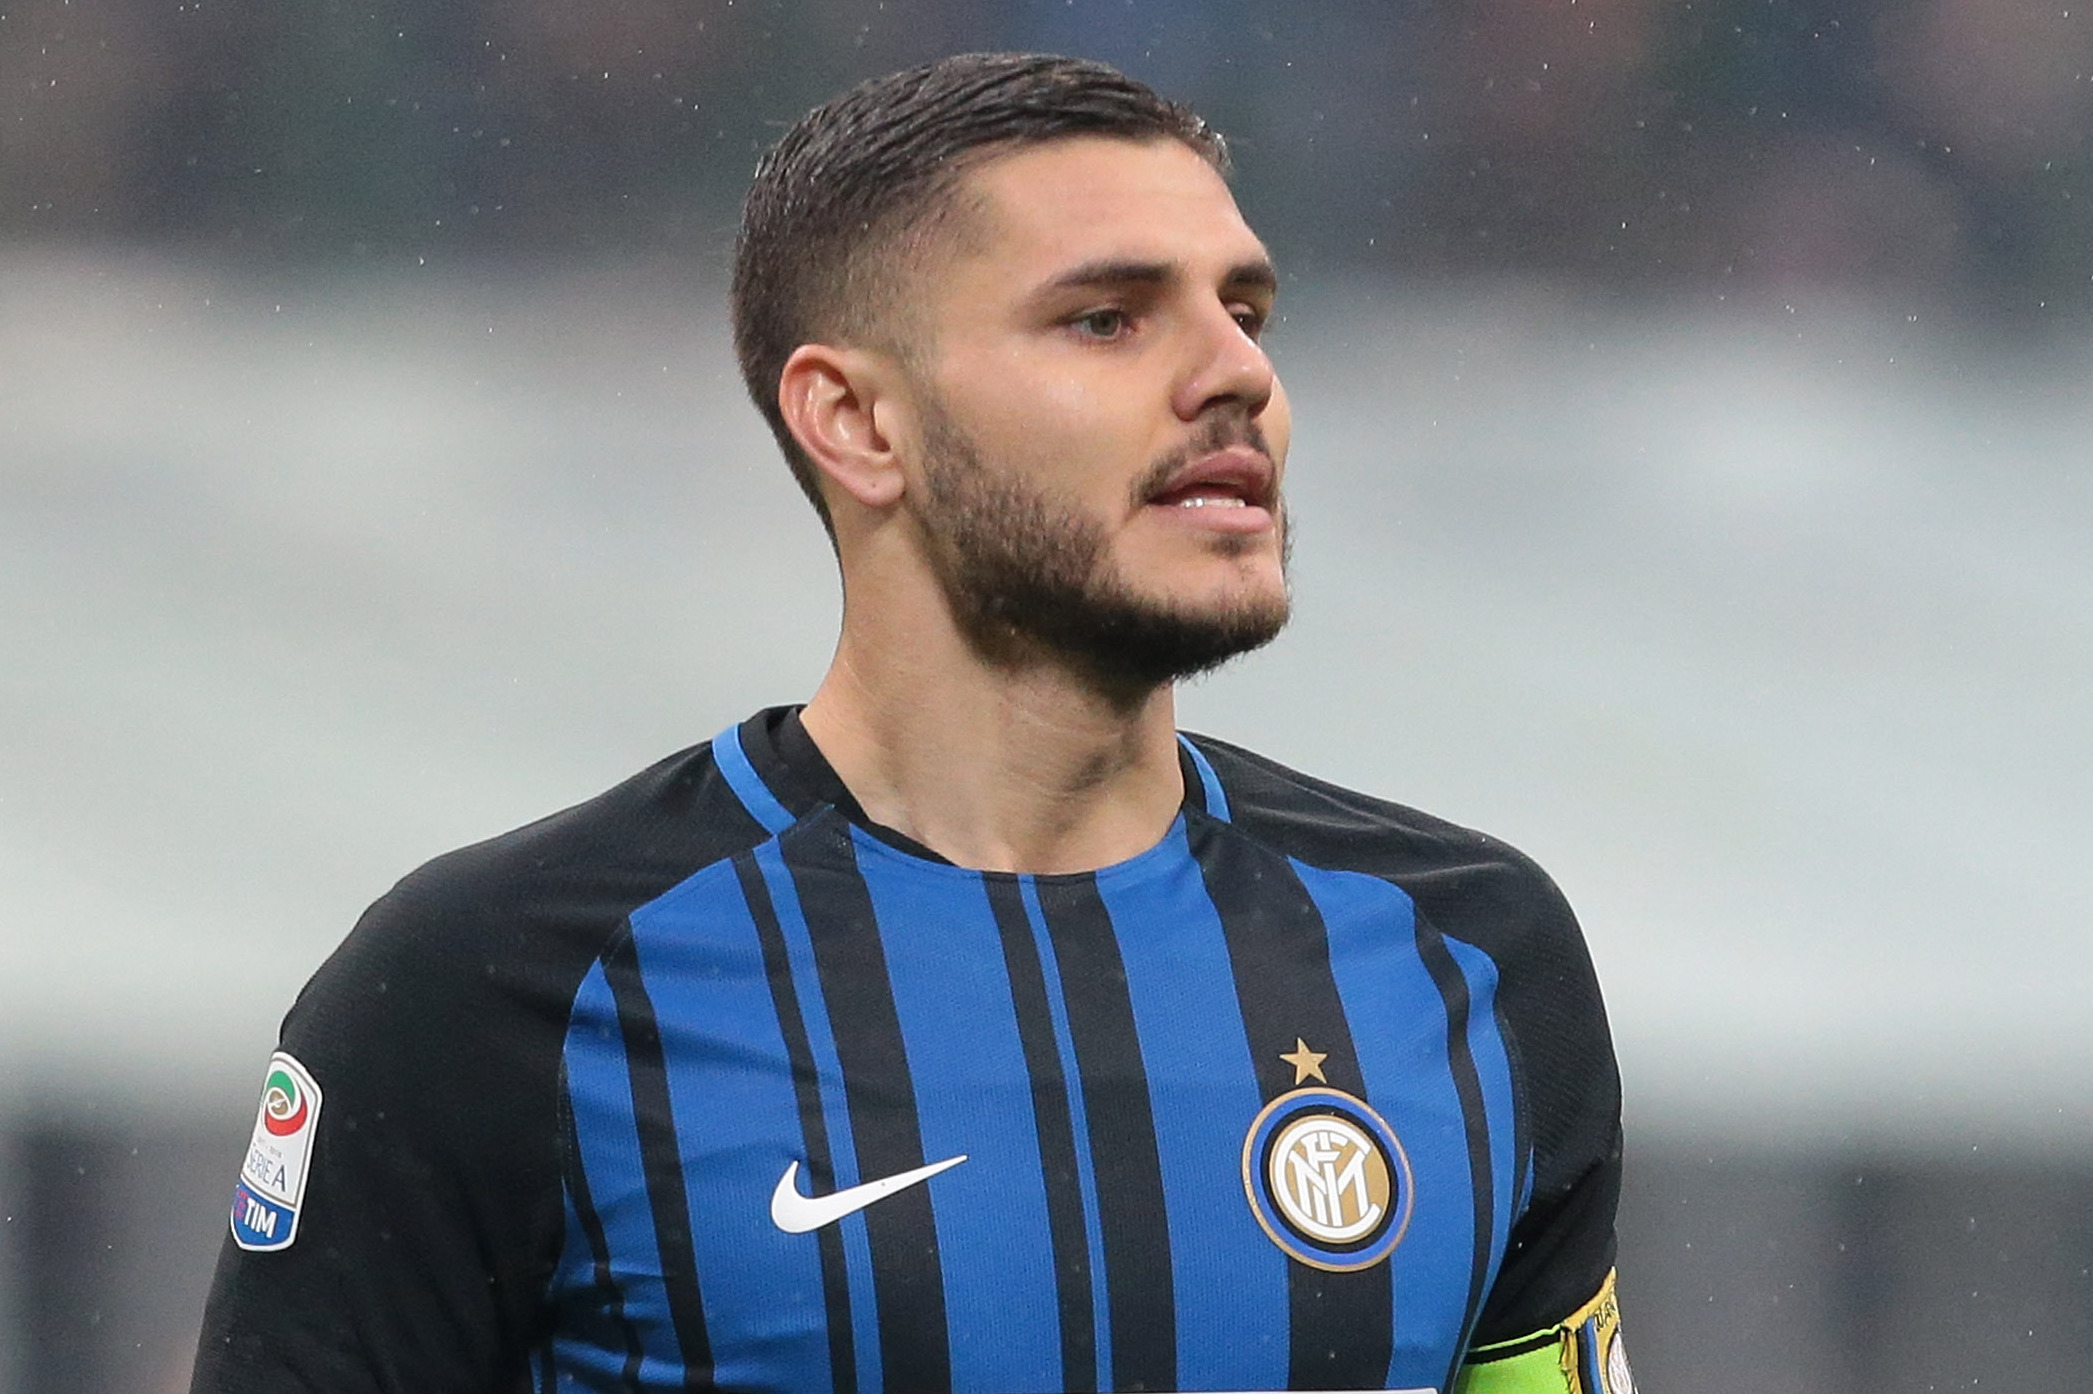 Report: Mauro Icardi to Miss World Cup over Issues with Lionel